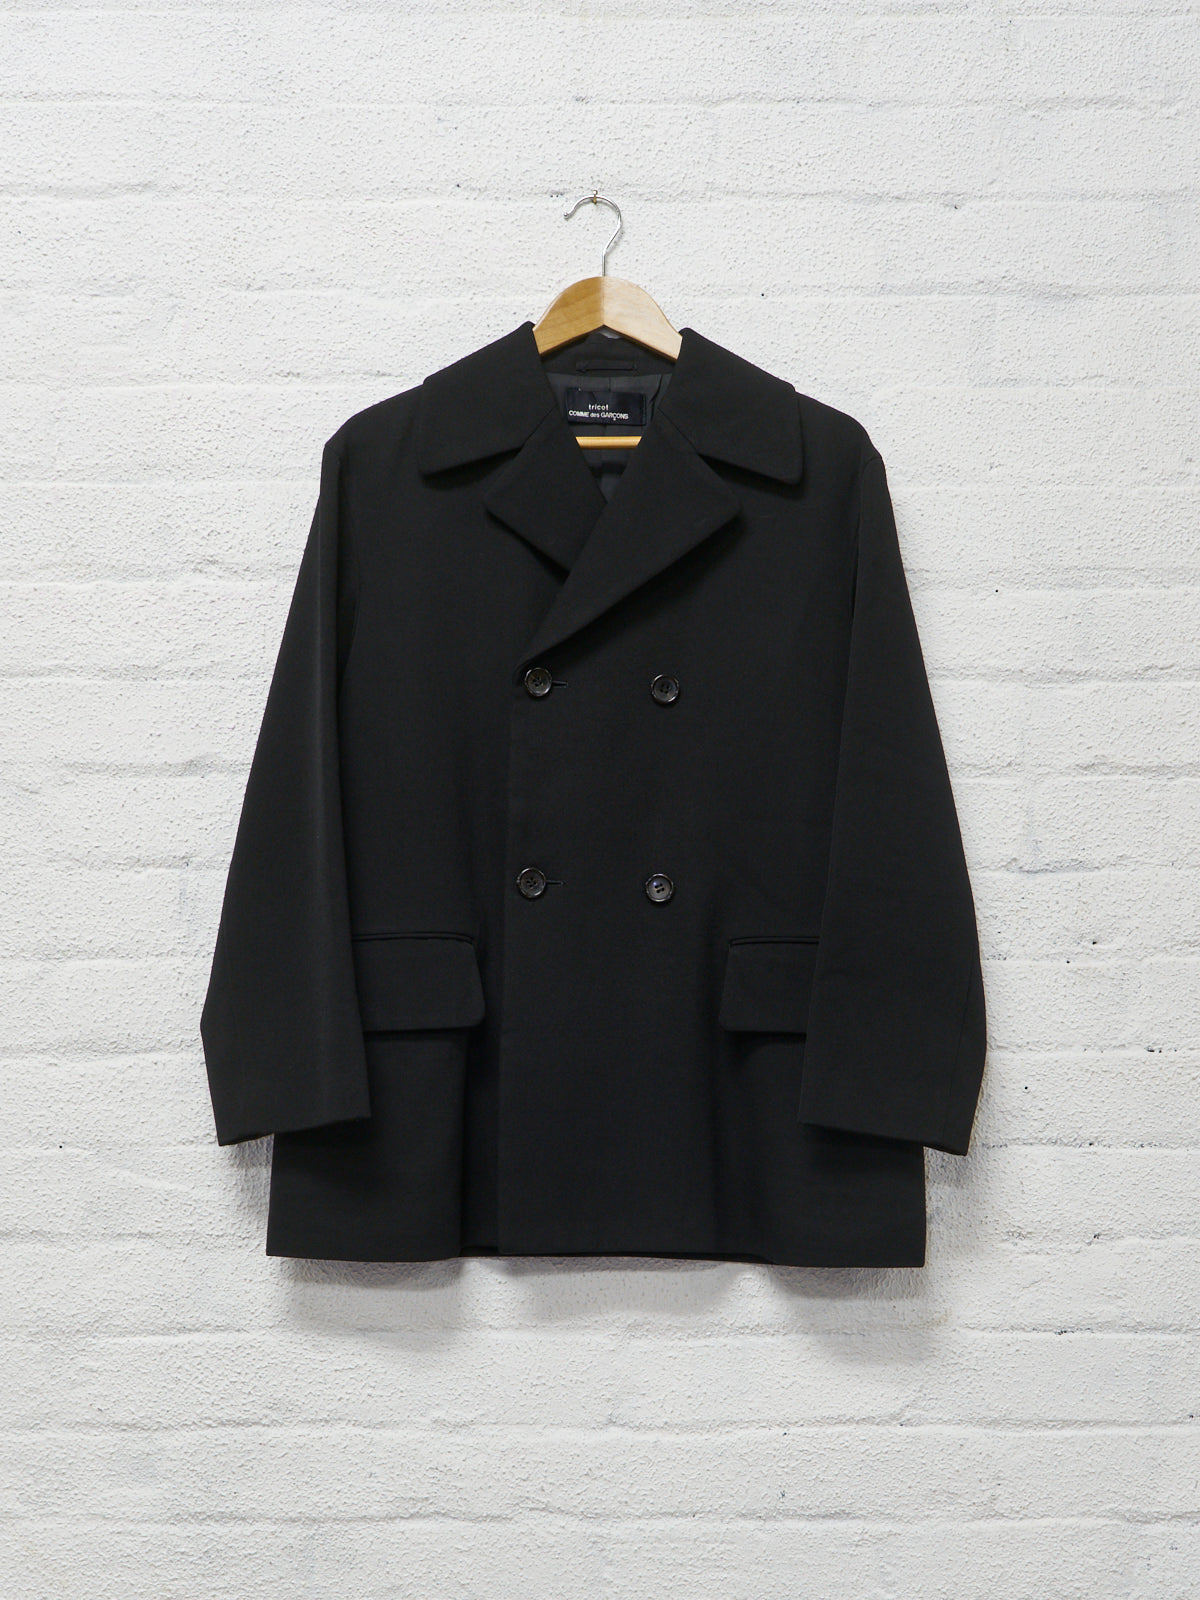 tricot comme des garcons black wool gabardine boxy double breasted pea coat - 1990s